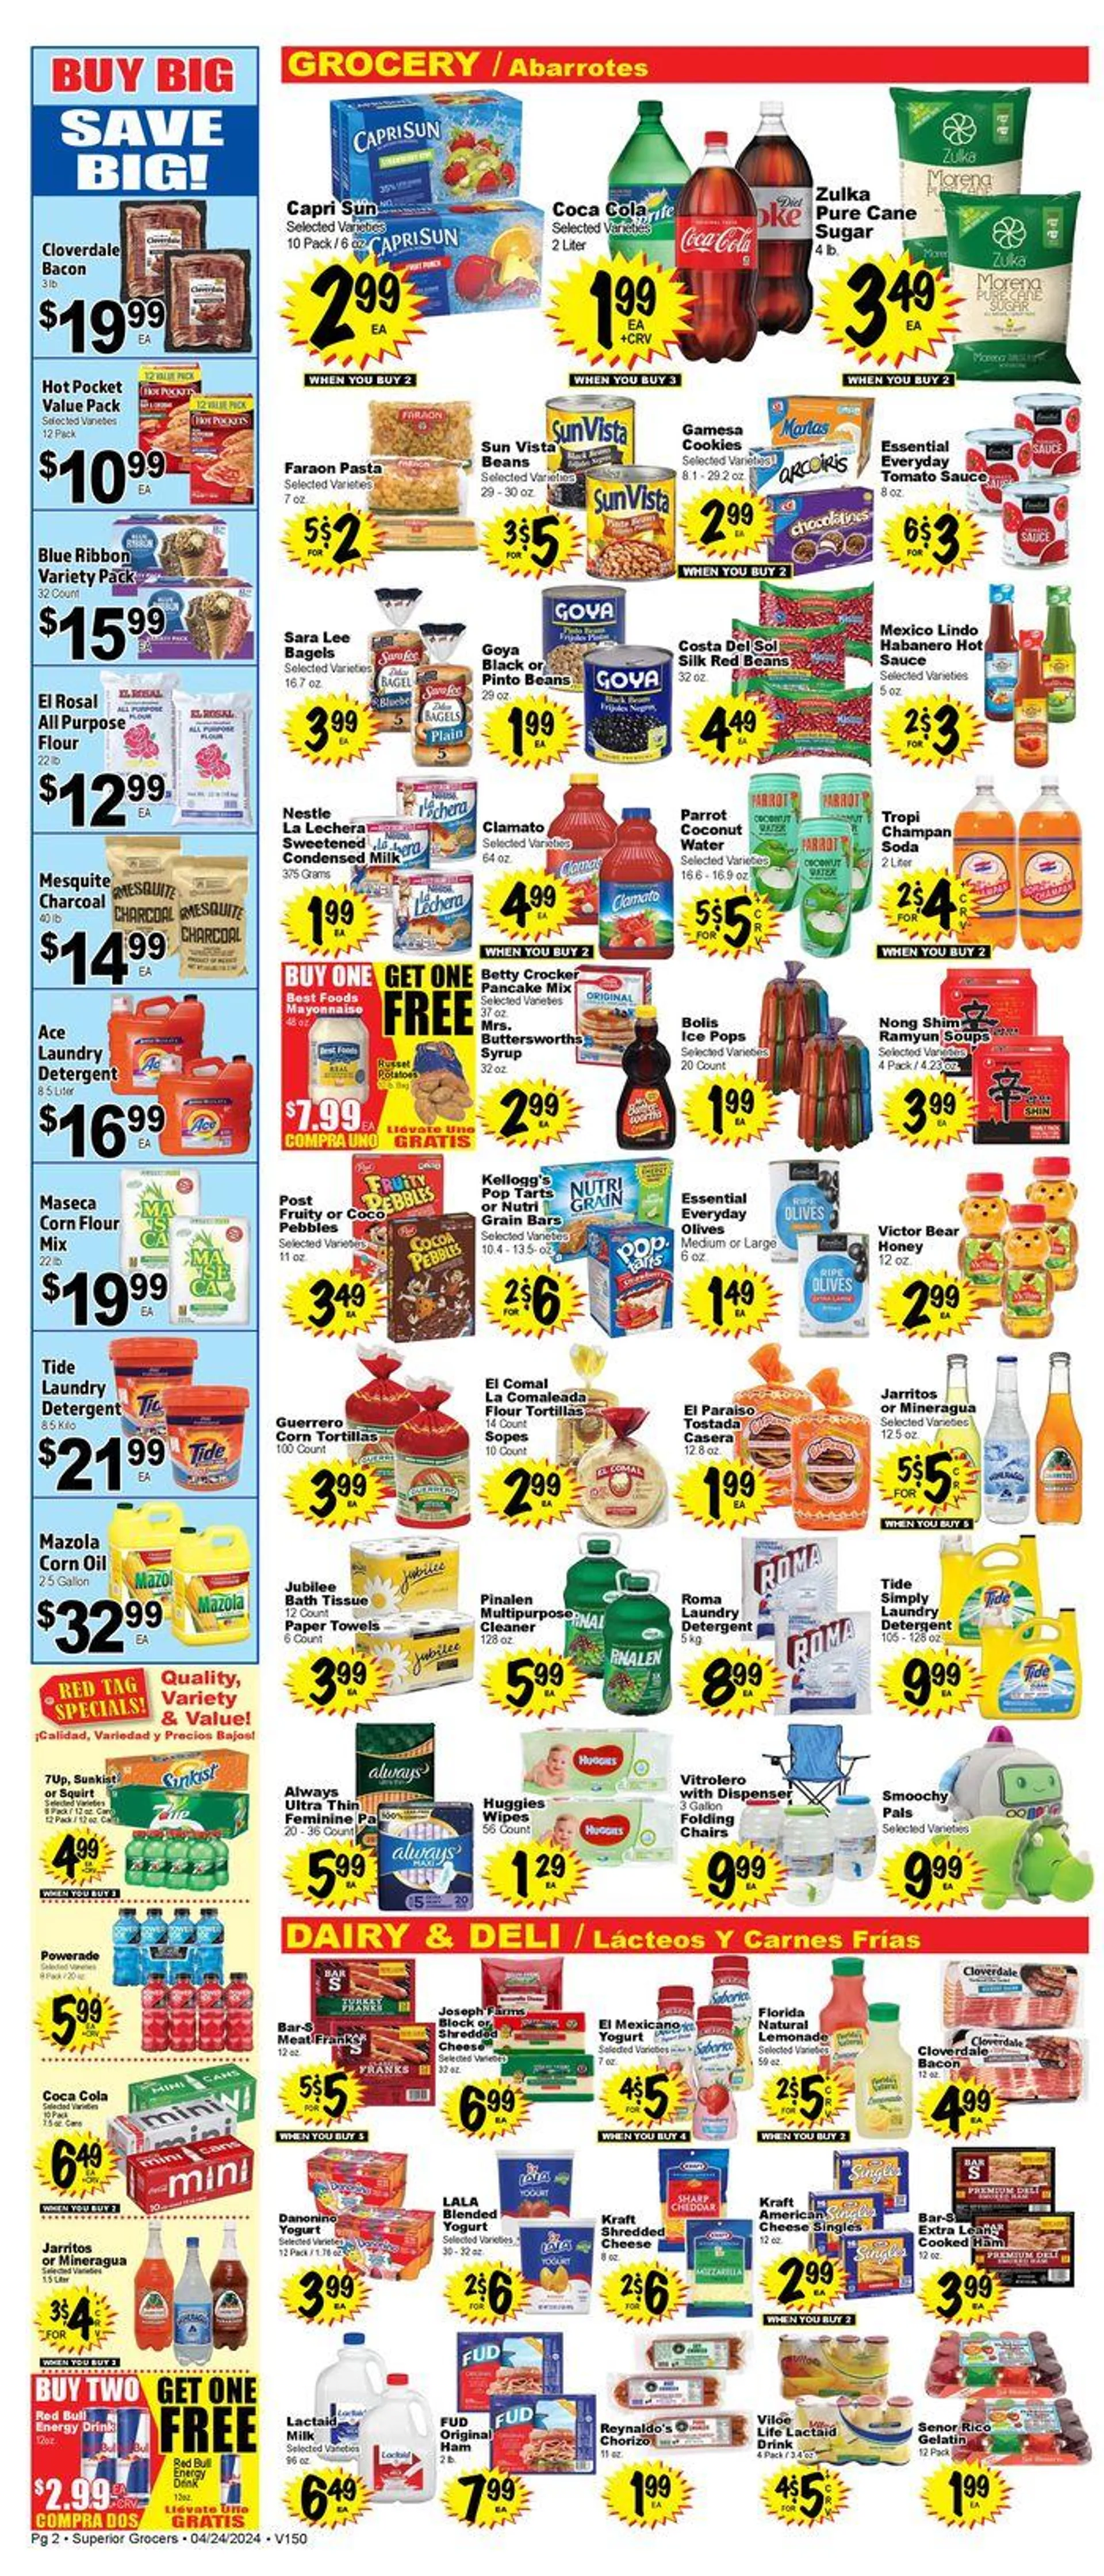 Weekly specials Superior Grocers - 2